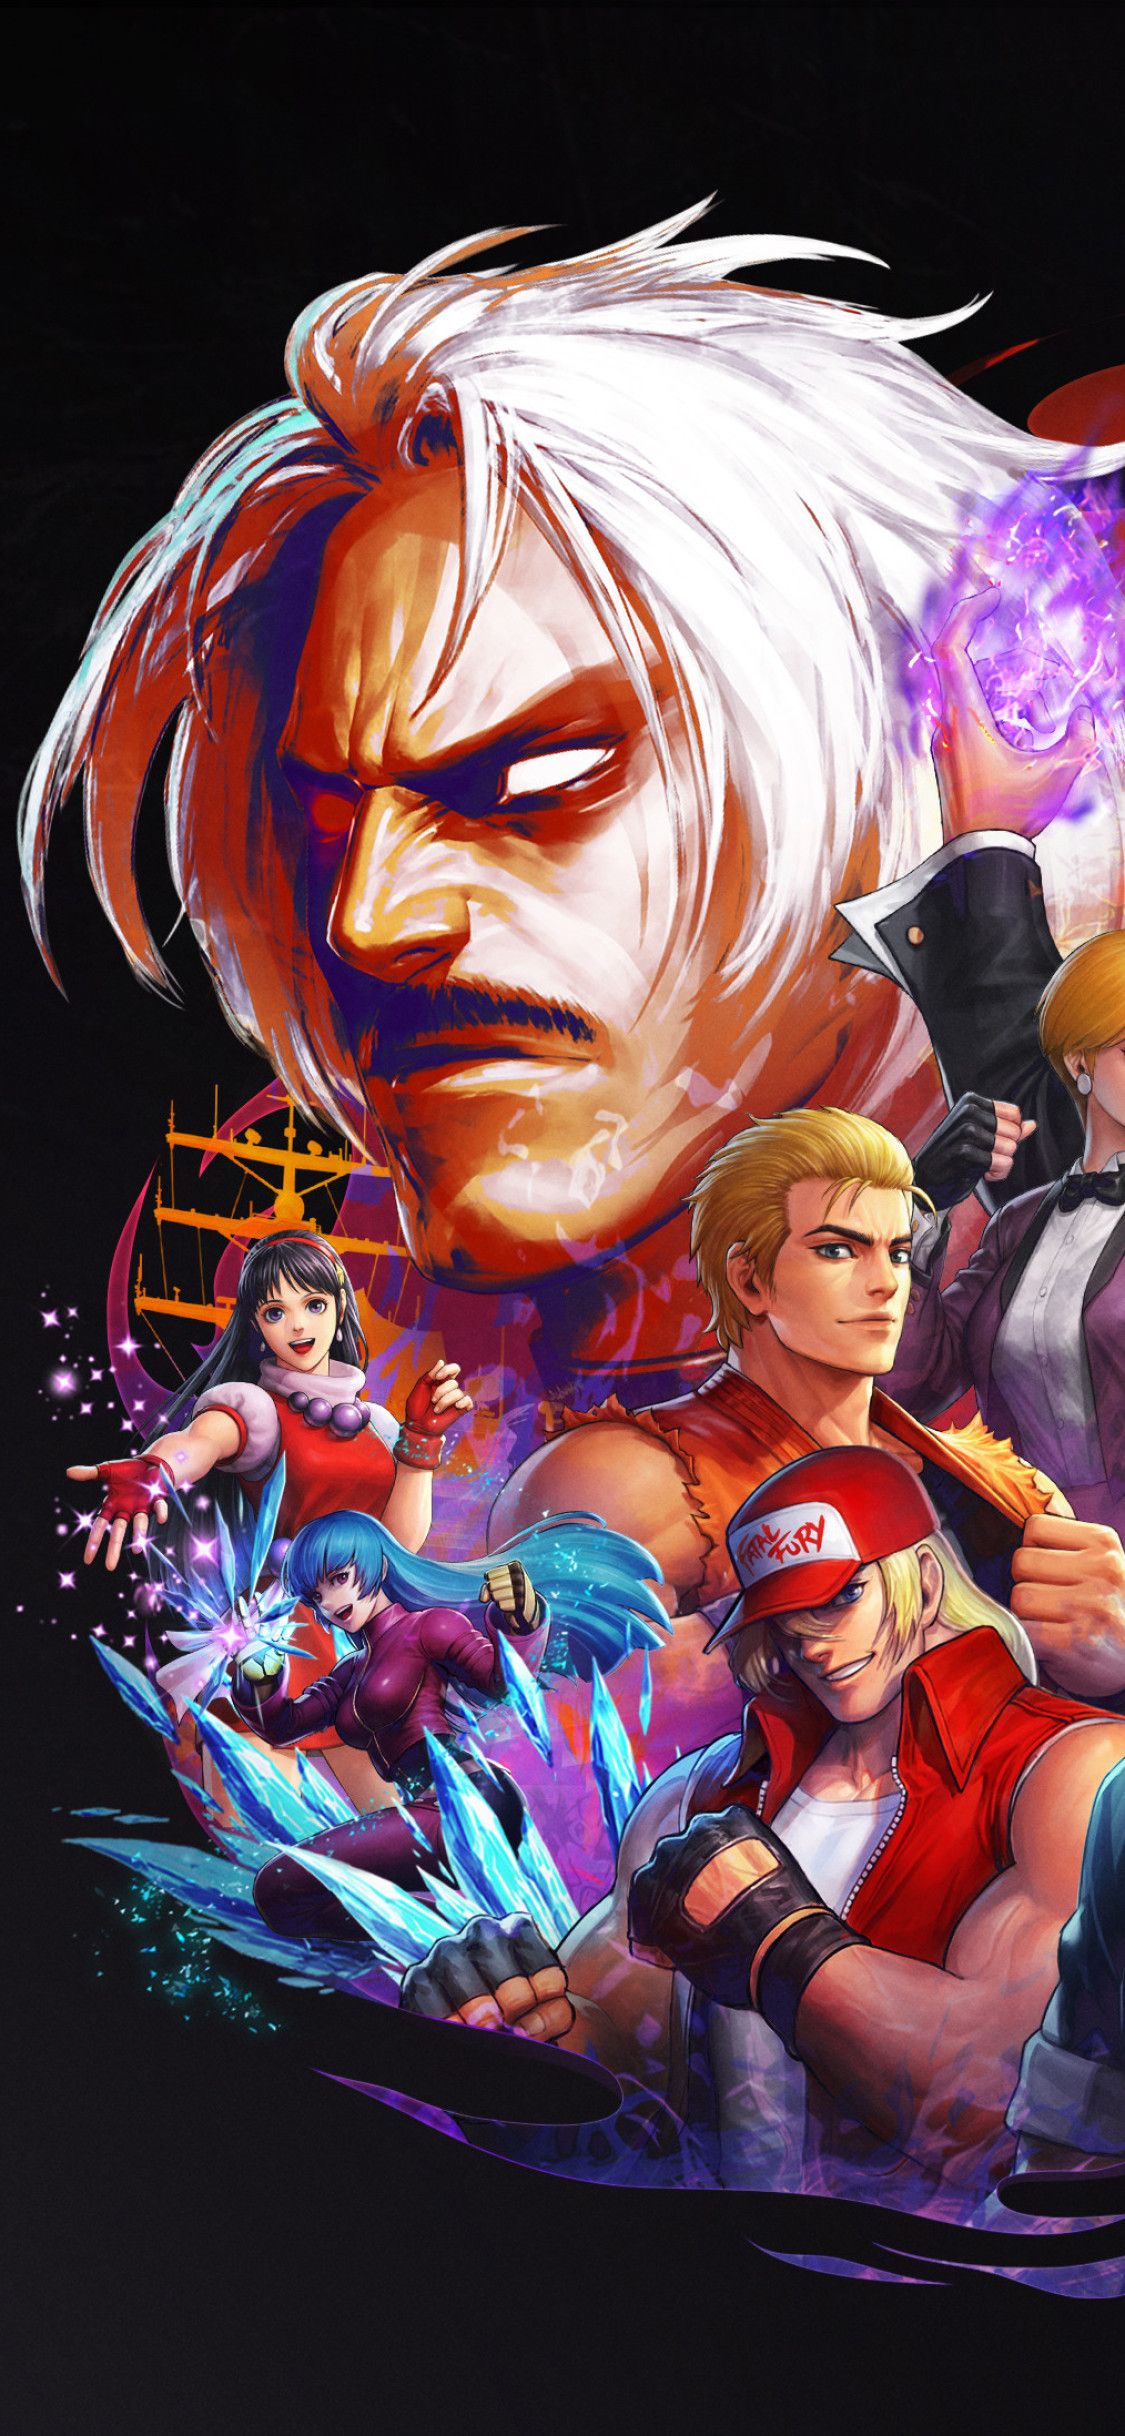 The King Of Fighters HD iPhone Wallpapers - Wallpaper Cave